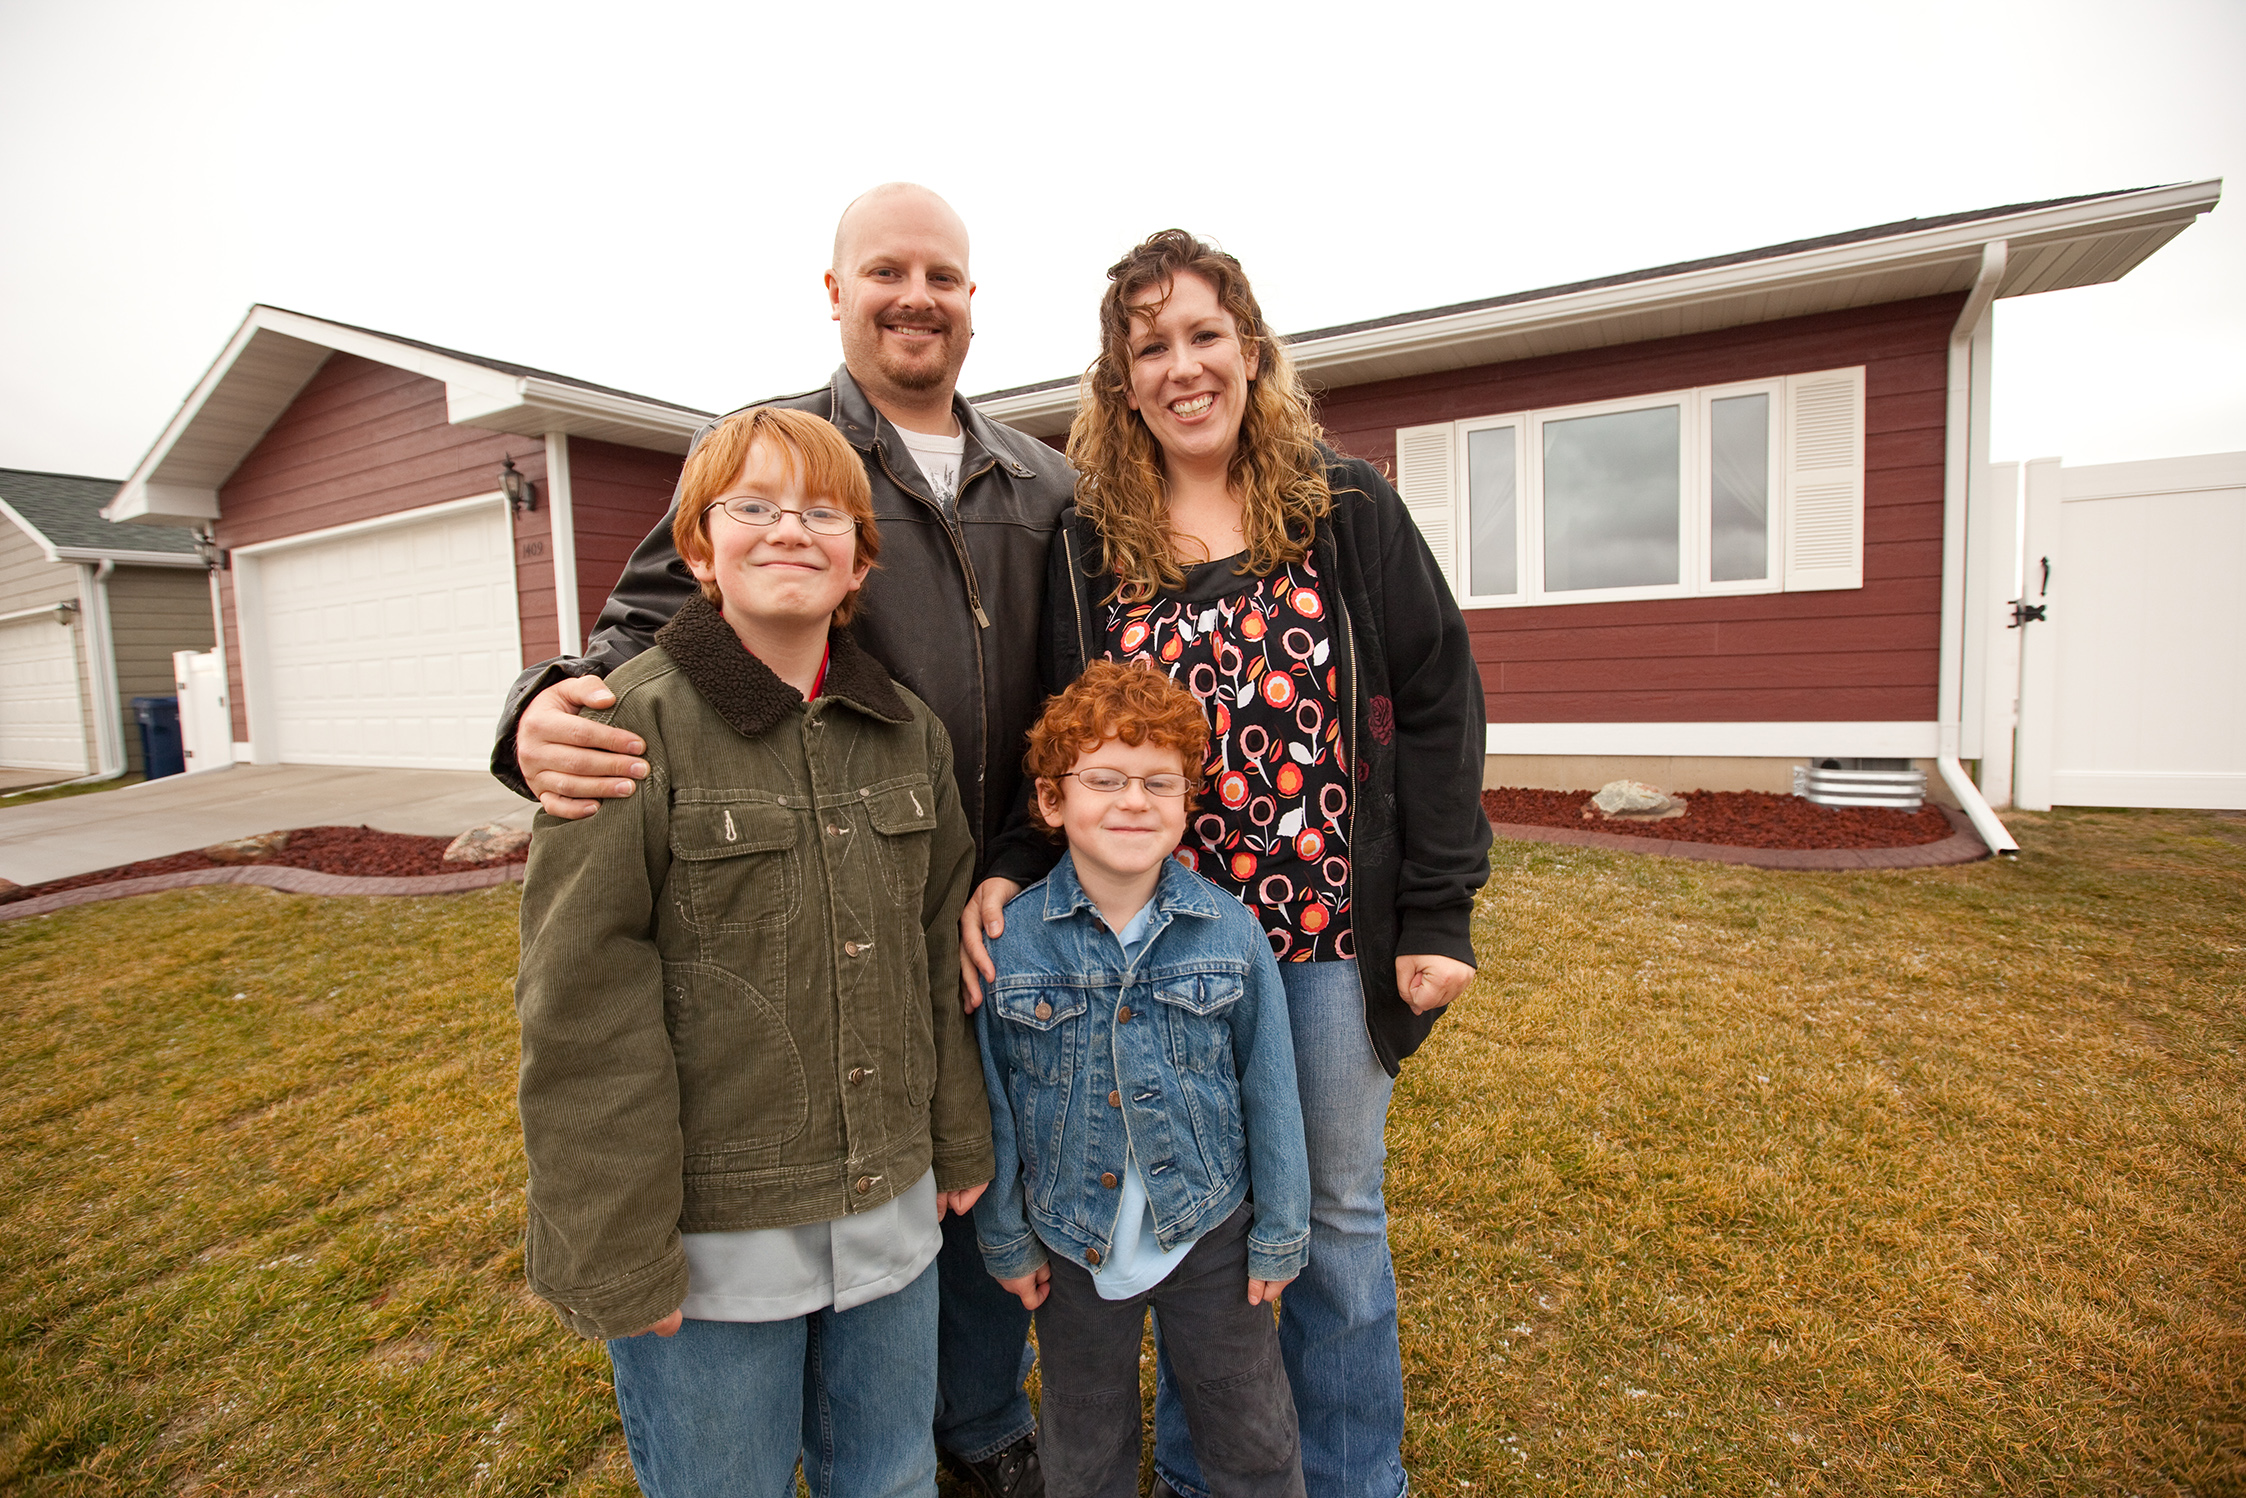 Helping people avoid foreclosure and eviction, particular in communities of color, was a goal of NeighborWorks America’s Keeping People Housed program.